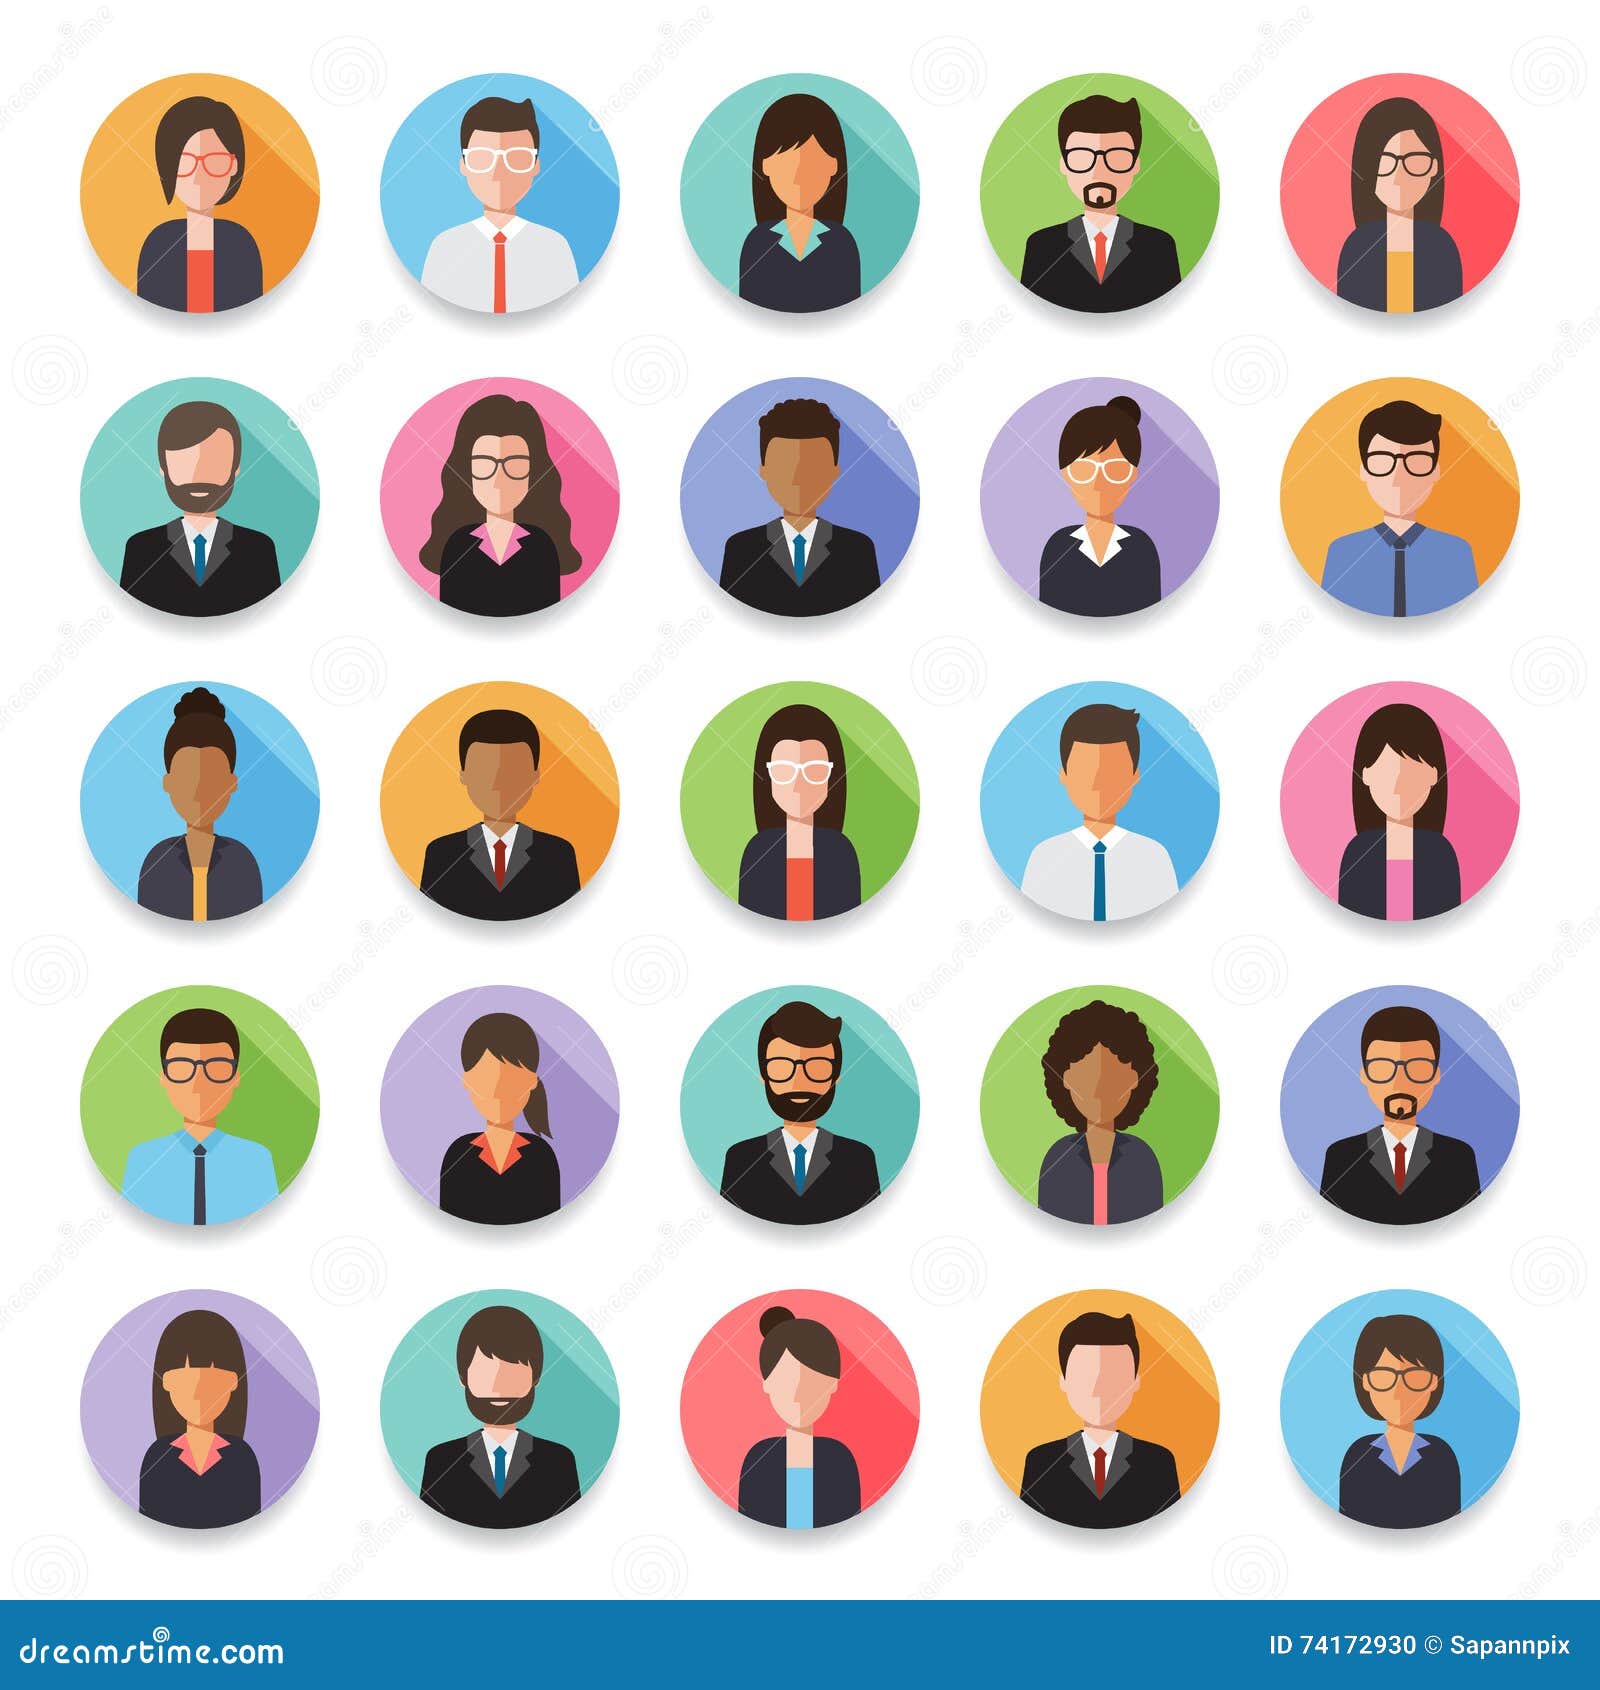 Employee Avatar PNG Transparent Images Free Download  Vector Files   Pngtree